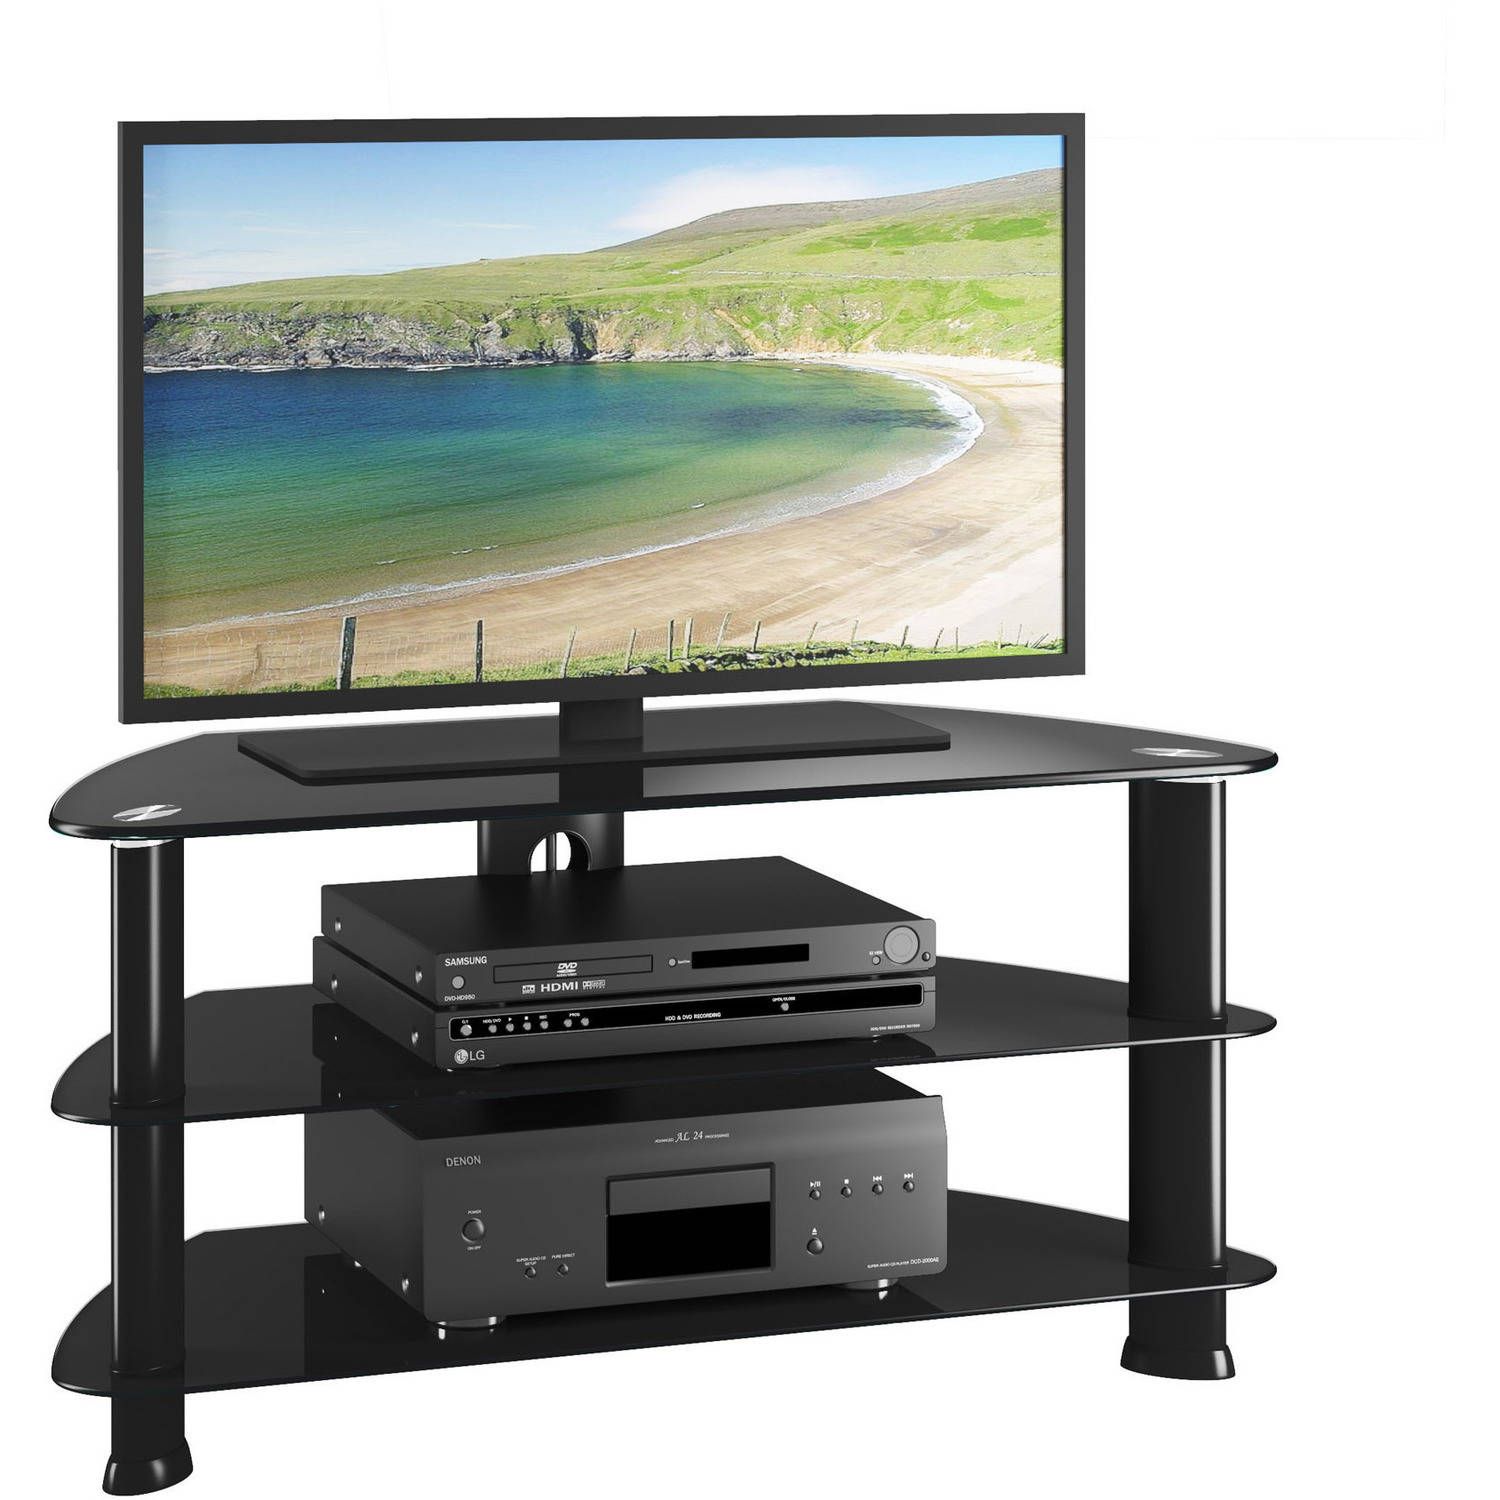 Laguna Satin Black Corner Tv Stand For Tvs Up To 50 Within 40 Inch Corner Tv Stands (View 10 of 15)